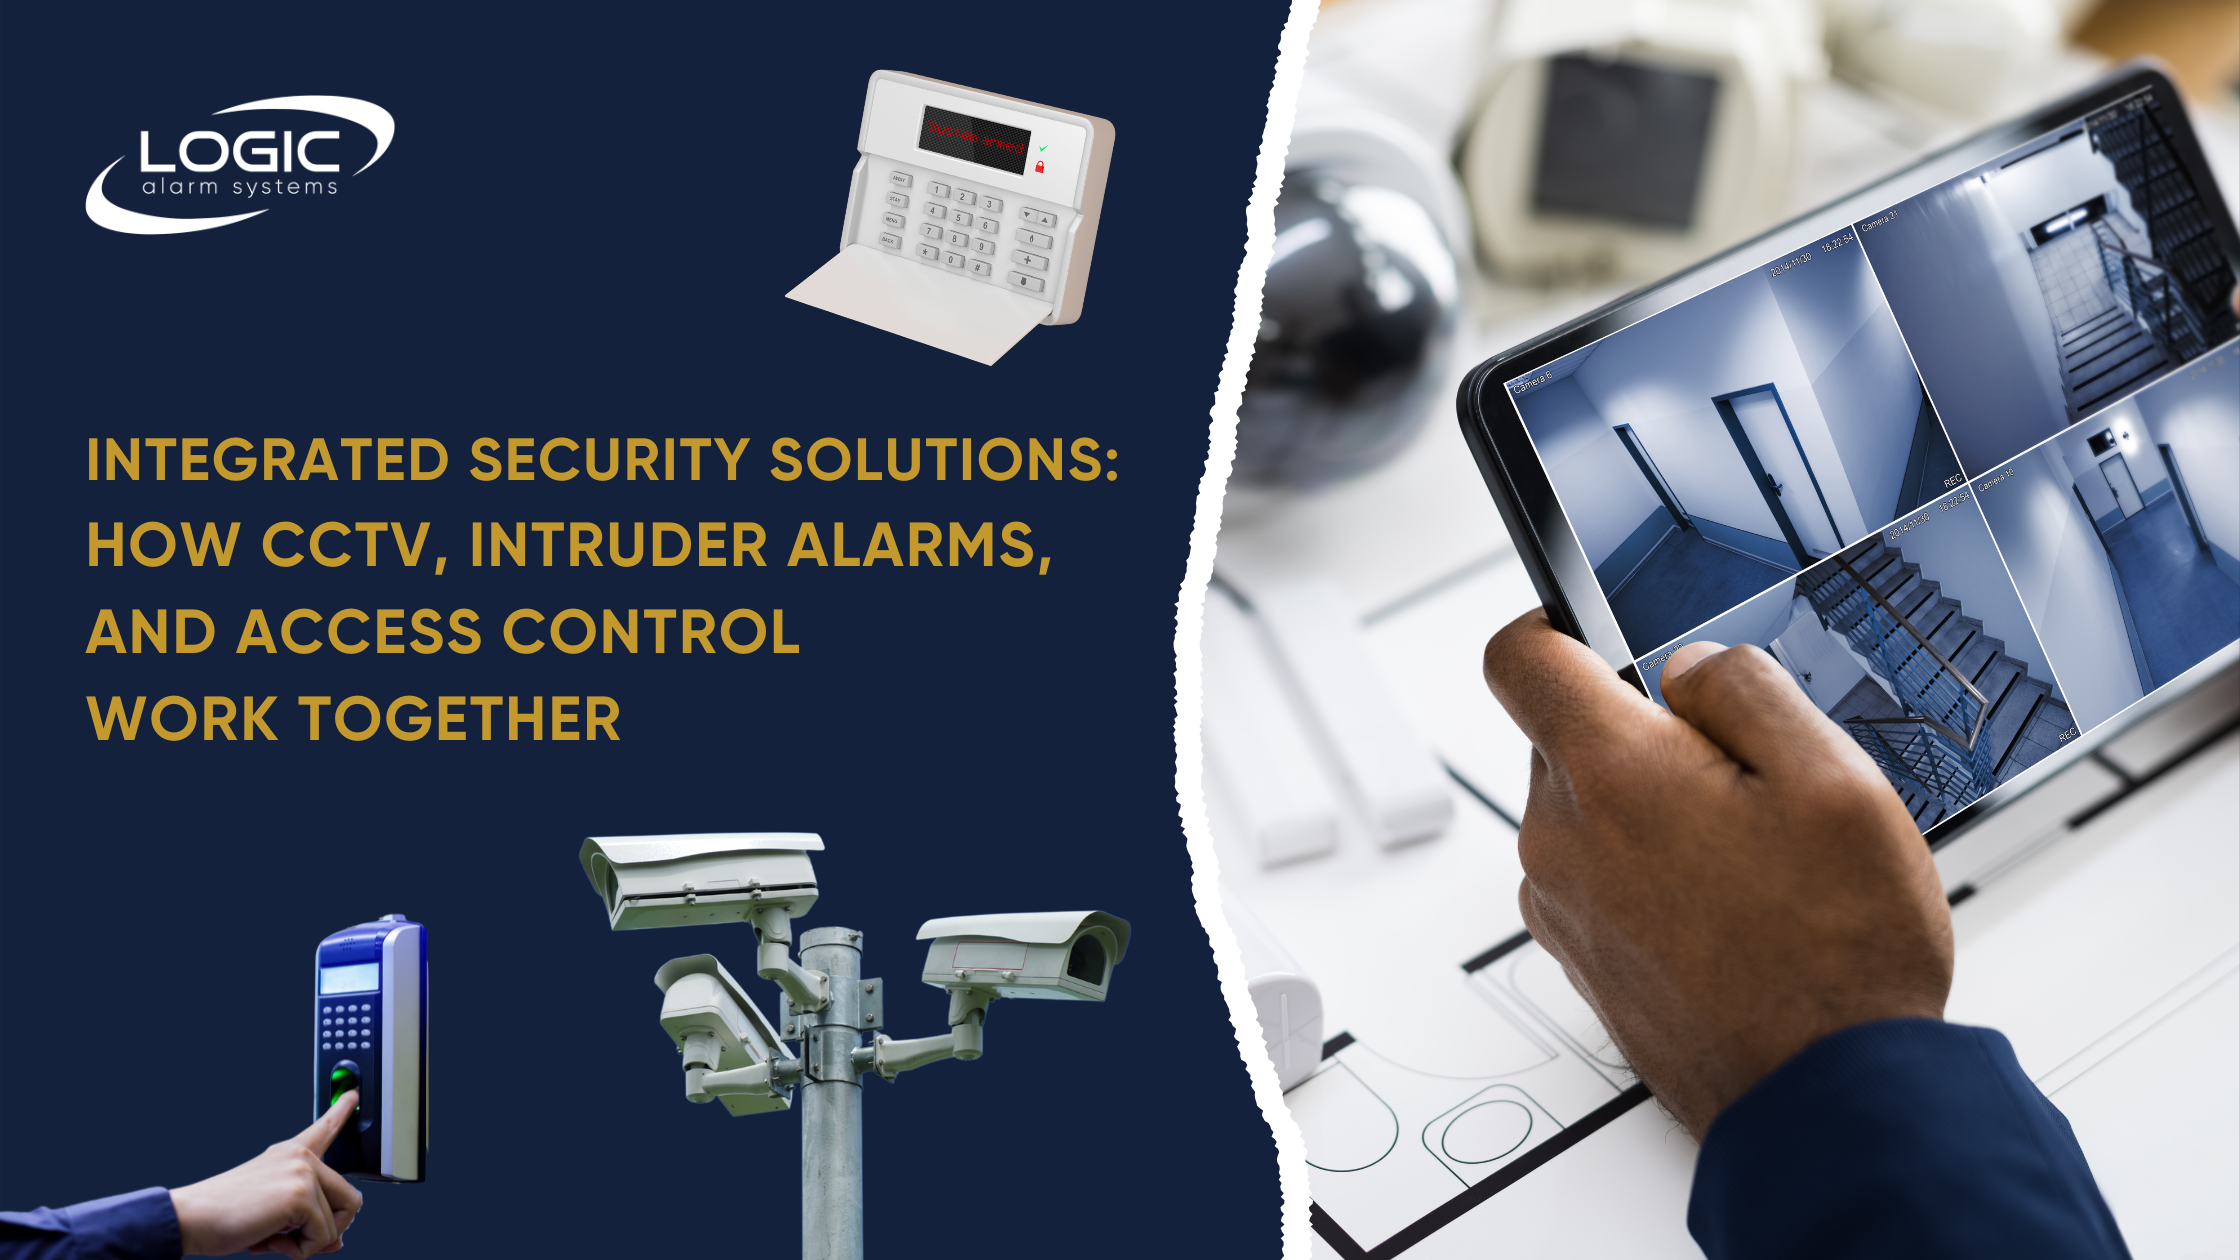 Blog banner with blog title, images of access control, CCTV, and intruder alarm, as well as an Image of someone holding a tablet with security footage on it.